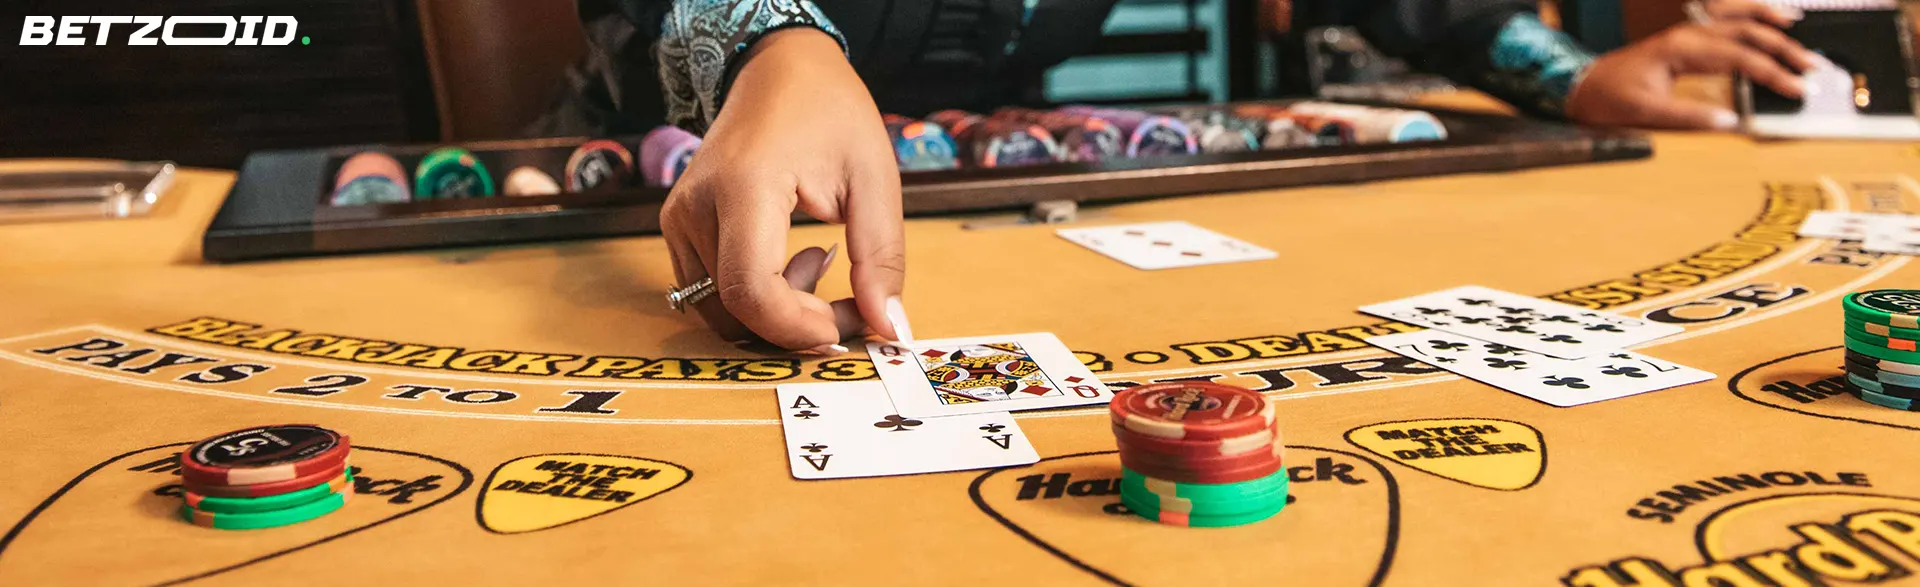 Intense blackjack game in action, capturing a dealer placing cards on the table, representing online casinos with no deposit limits in Canada.